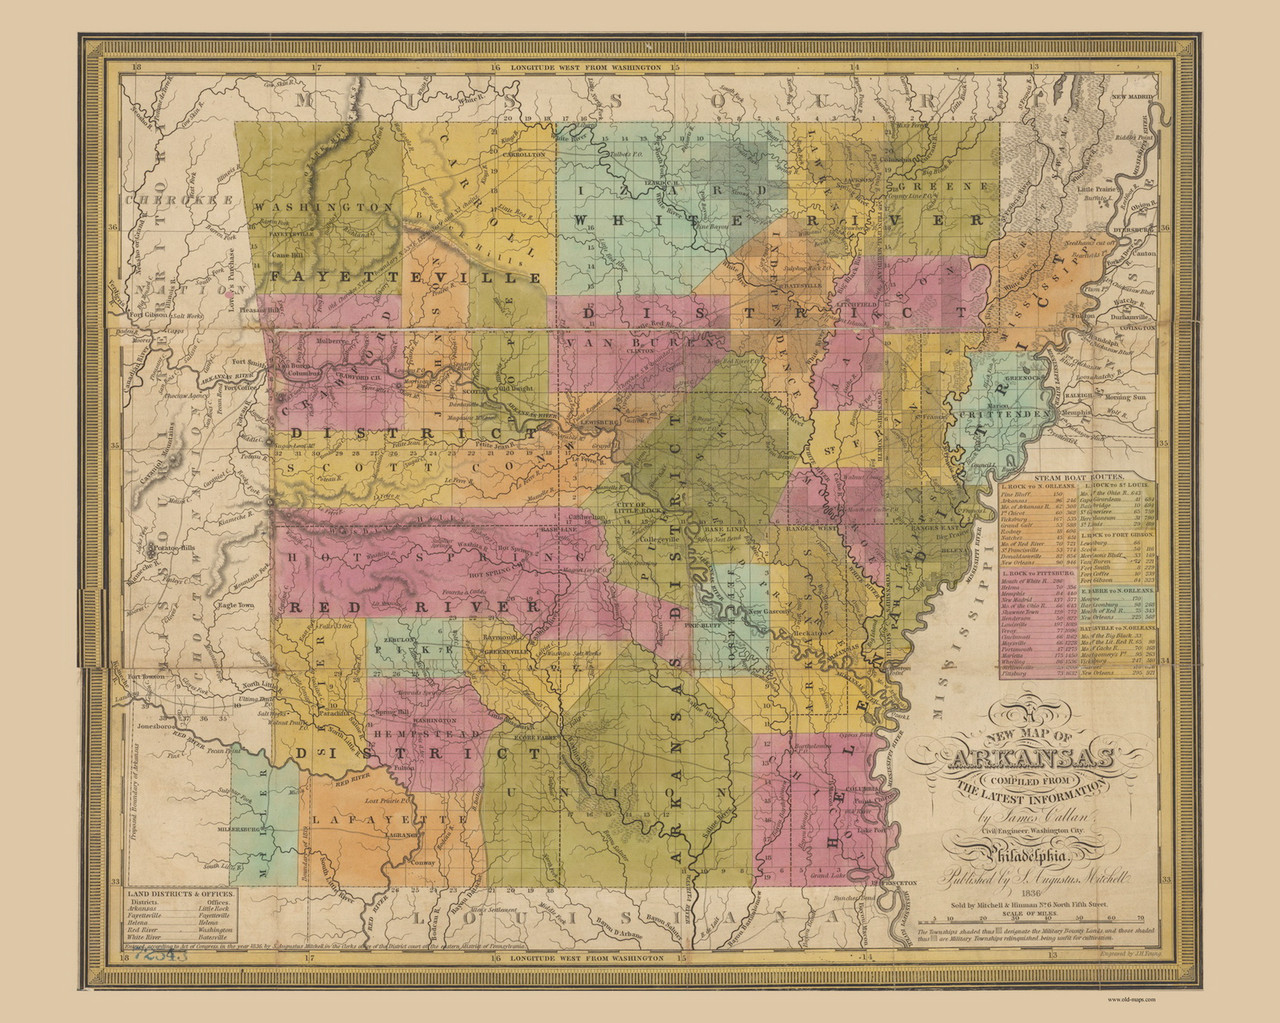 Arkansas 1836 Mitchell Old State Map Reprint Old Maps 7930